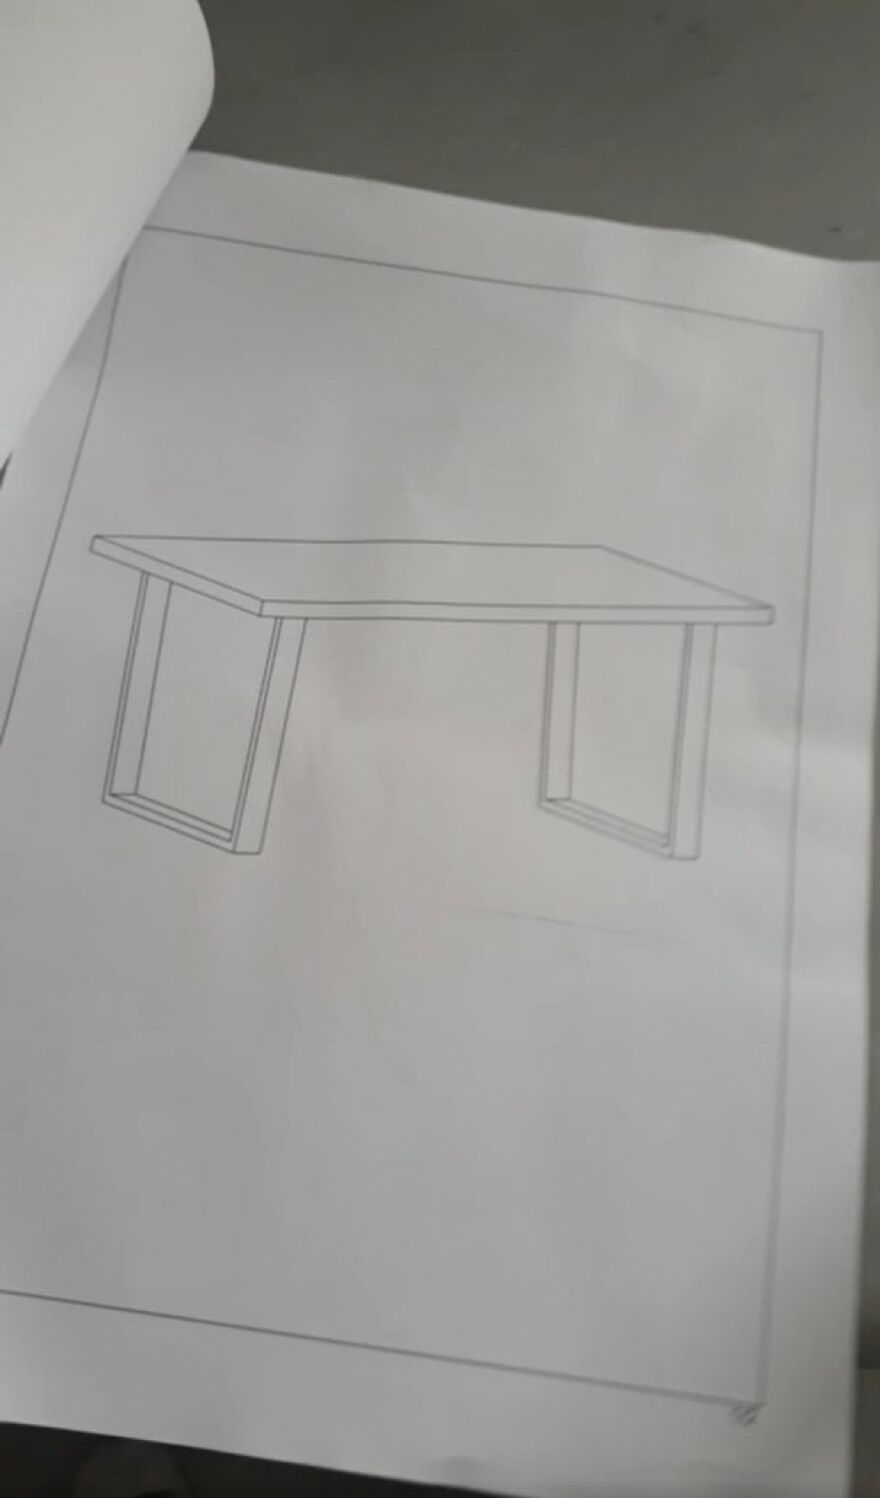 Putting A Table Together And These Are The Only Instructions That Came With It